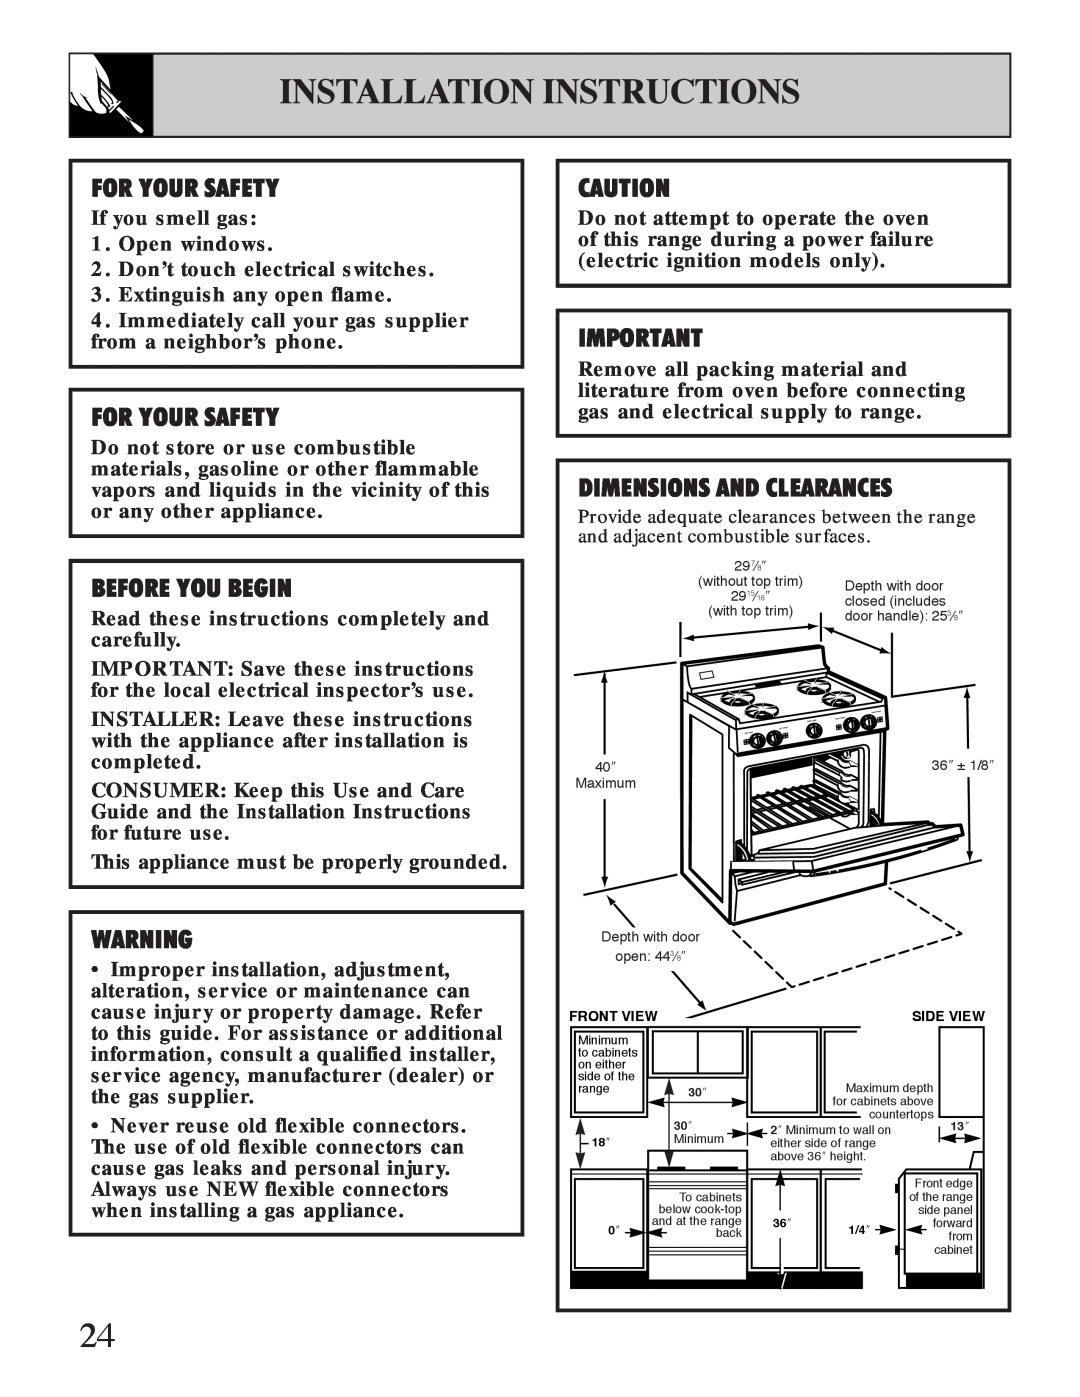 Hotpoint RGB506 Installation Instructions, For Your Safety, Before You Begin, Dimensions And Clearances 